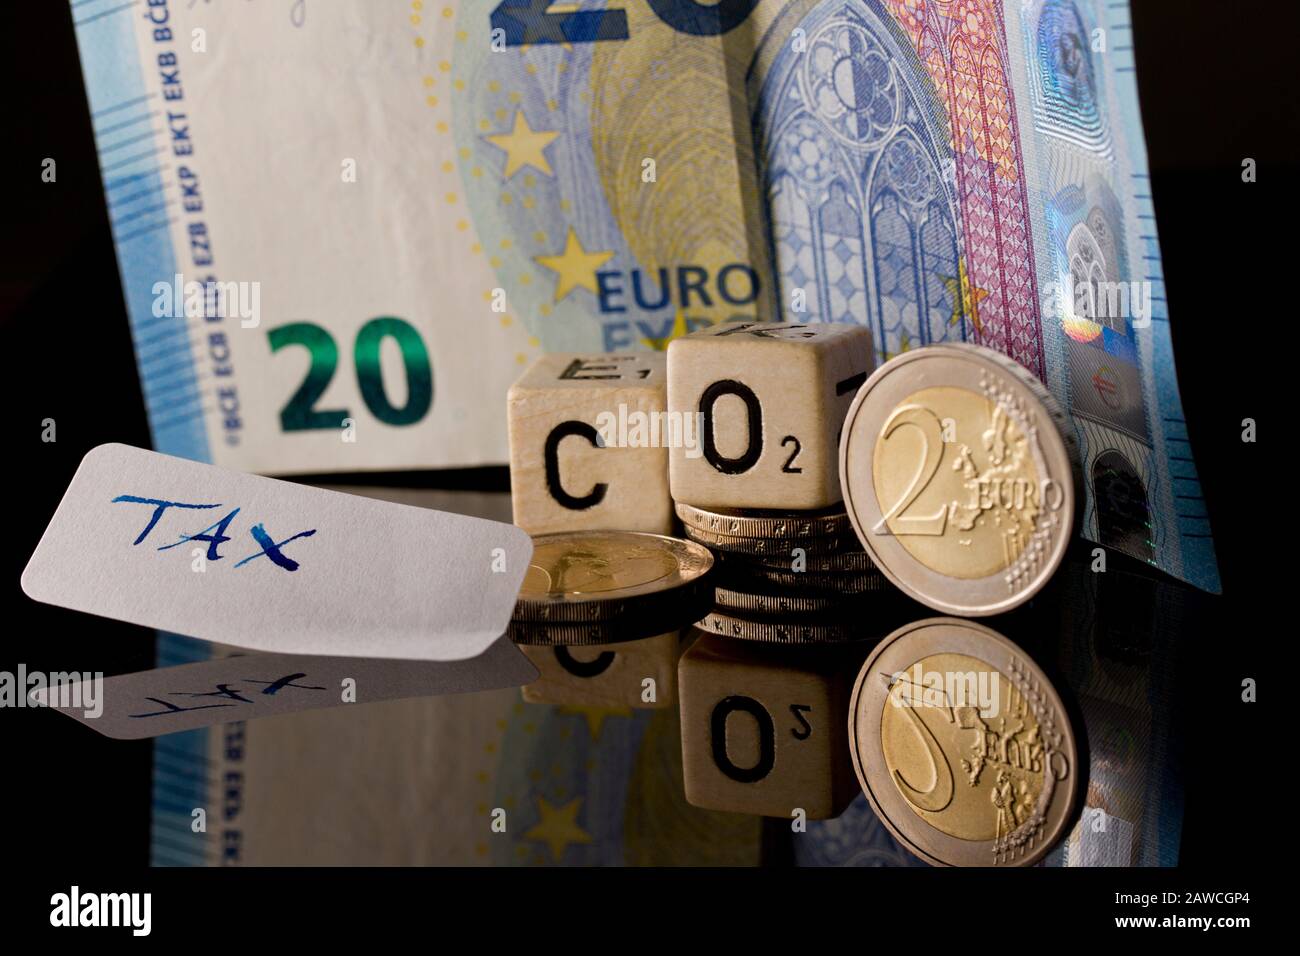 CO2-Abgabe und CO2-Steuer, CO2-certificates symbolized by money, letters and reflexion refexions Stock Photo